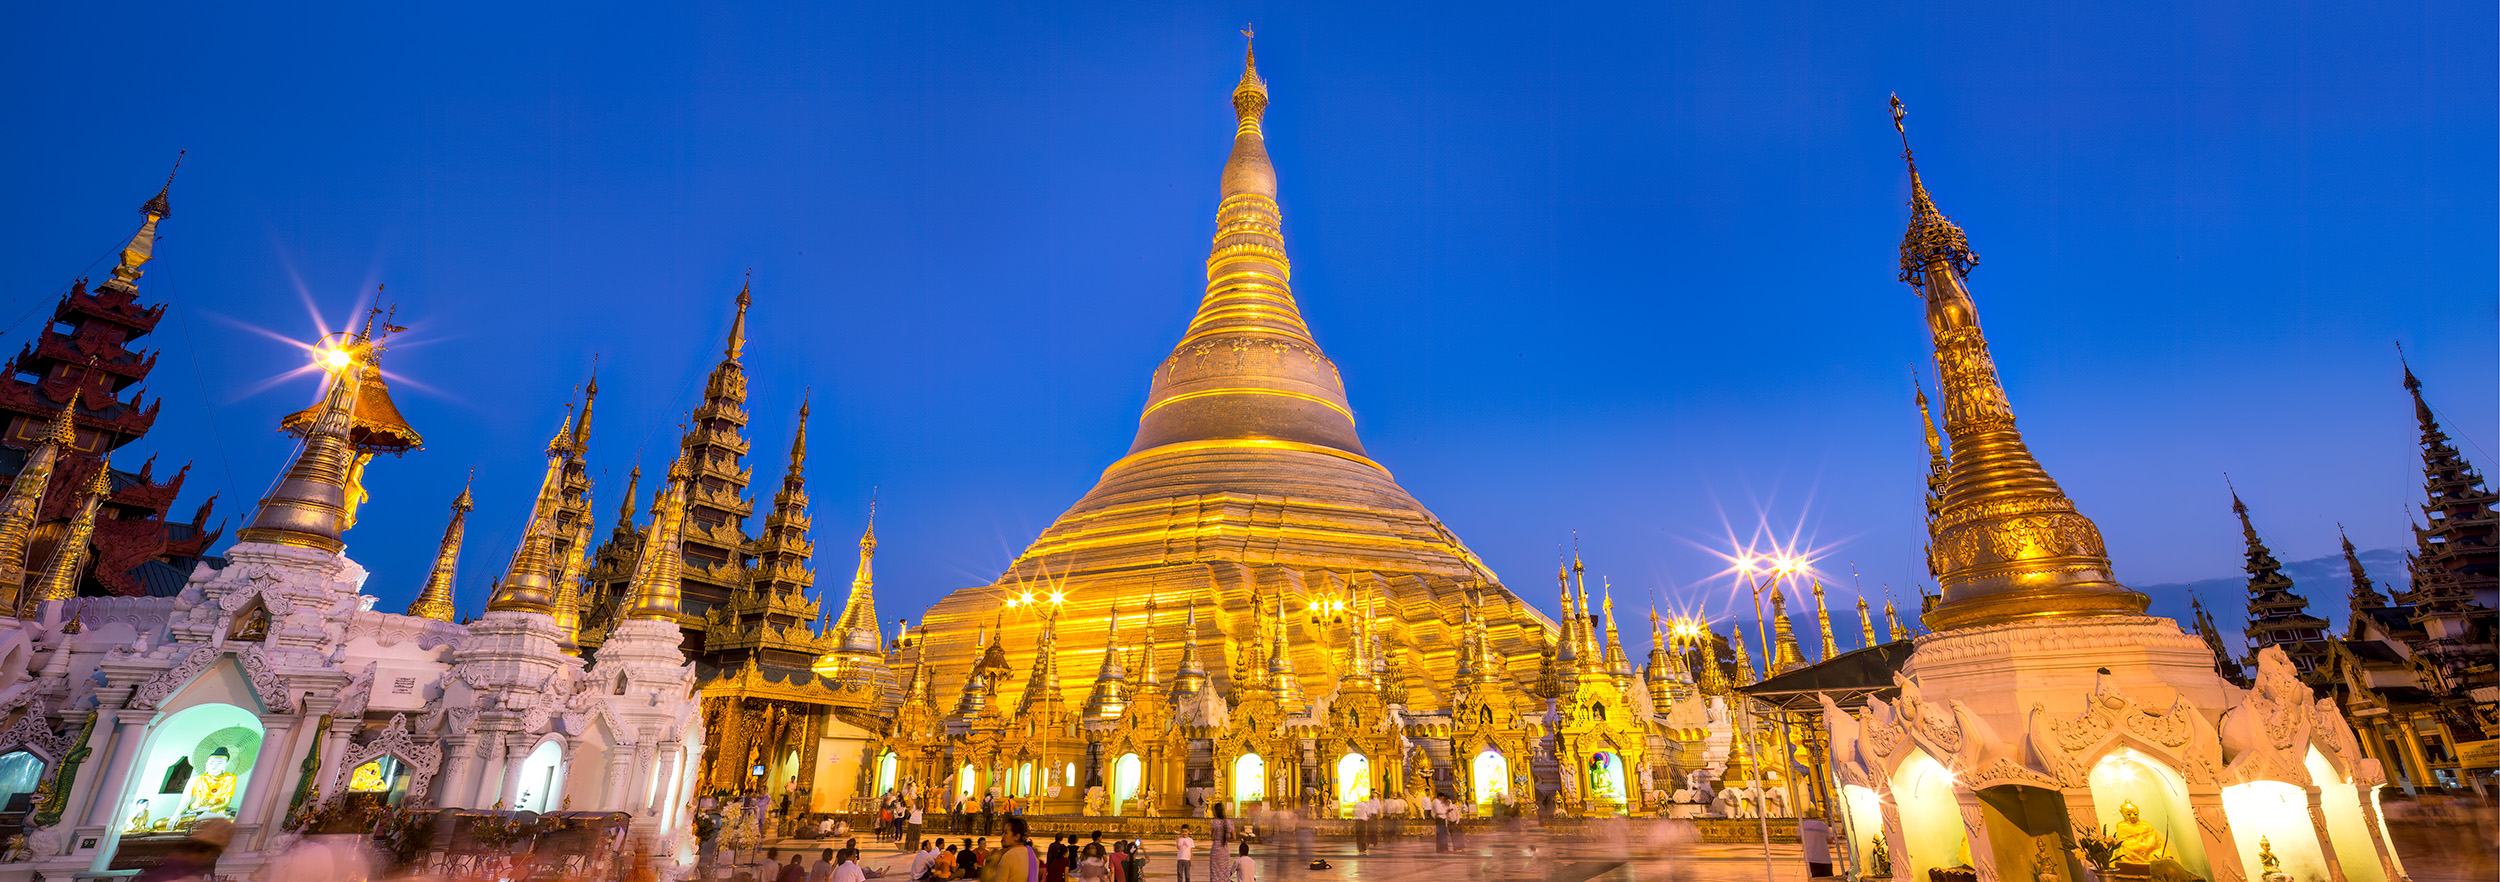 In "Golden Dreams," a stitched panoramic image, I finally realized a lifelong aspiration—visiting the Shwedagon Pagoda in Yangon...